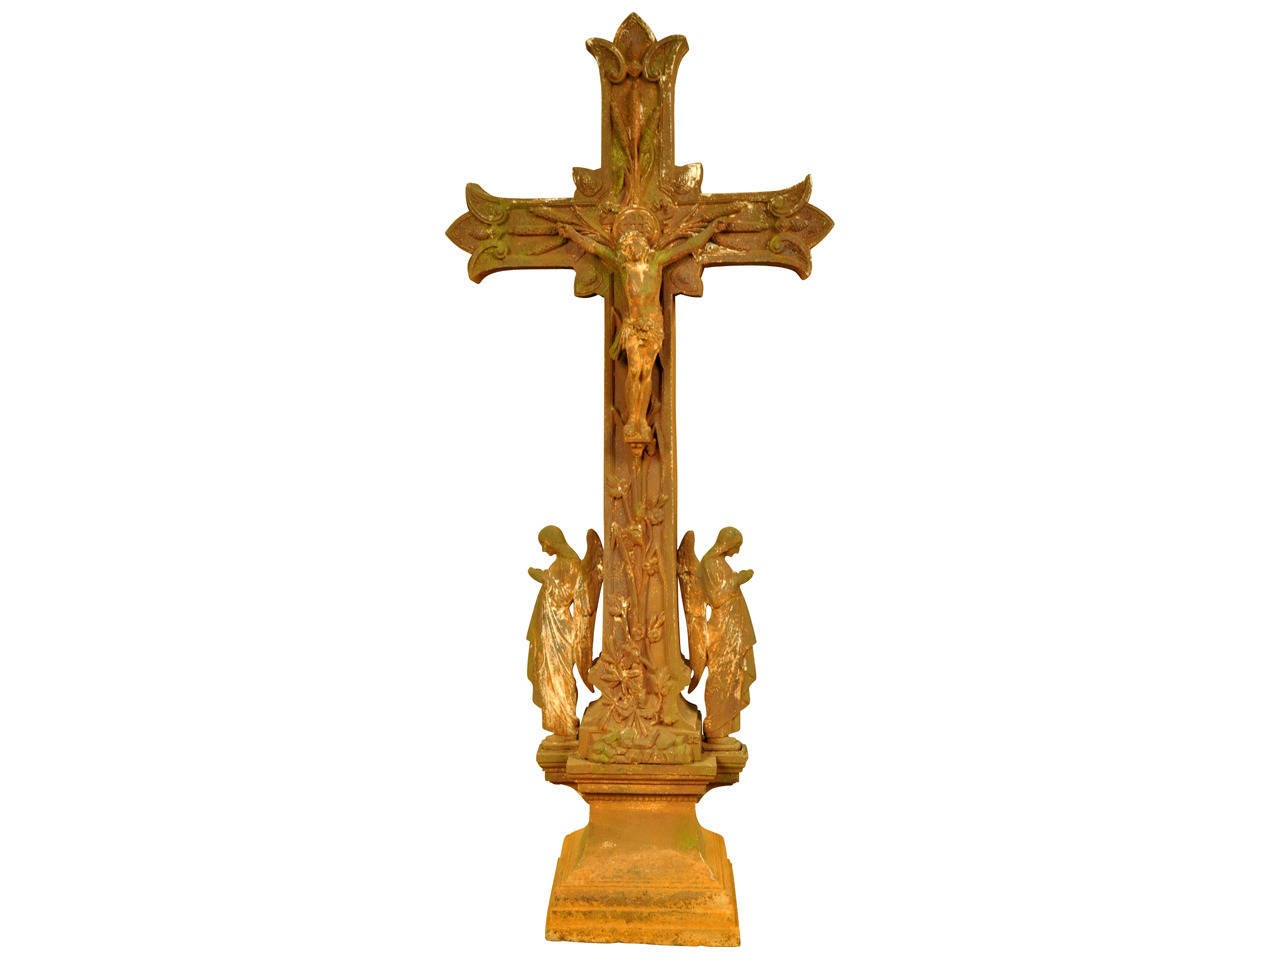 A very lovely 19th century Crucifix in cast iron - France, circa 1880.  Adorned with the corpus, cattails, pine cones, and two guarding angels.  A wonderful piece to grace any garden or interior.